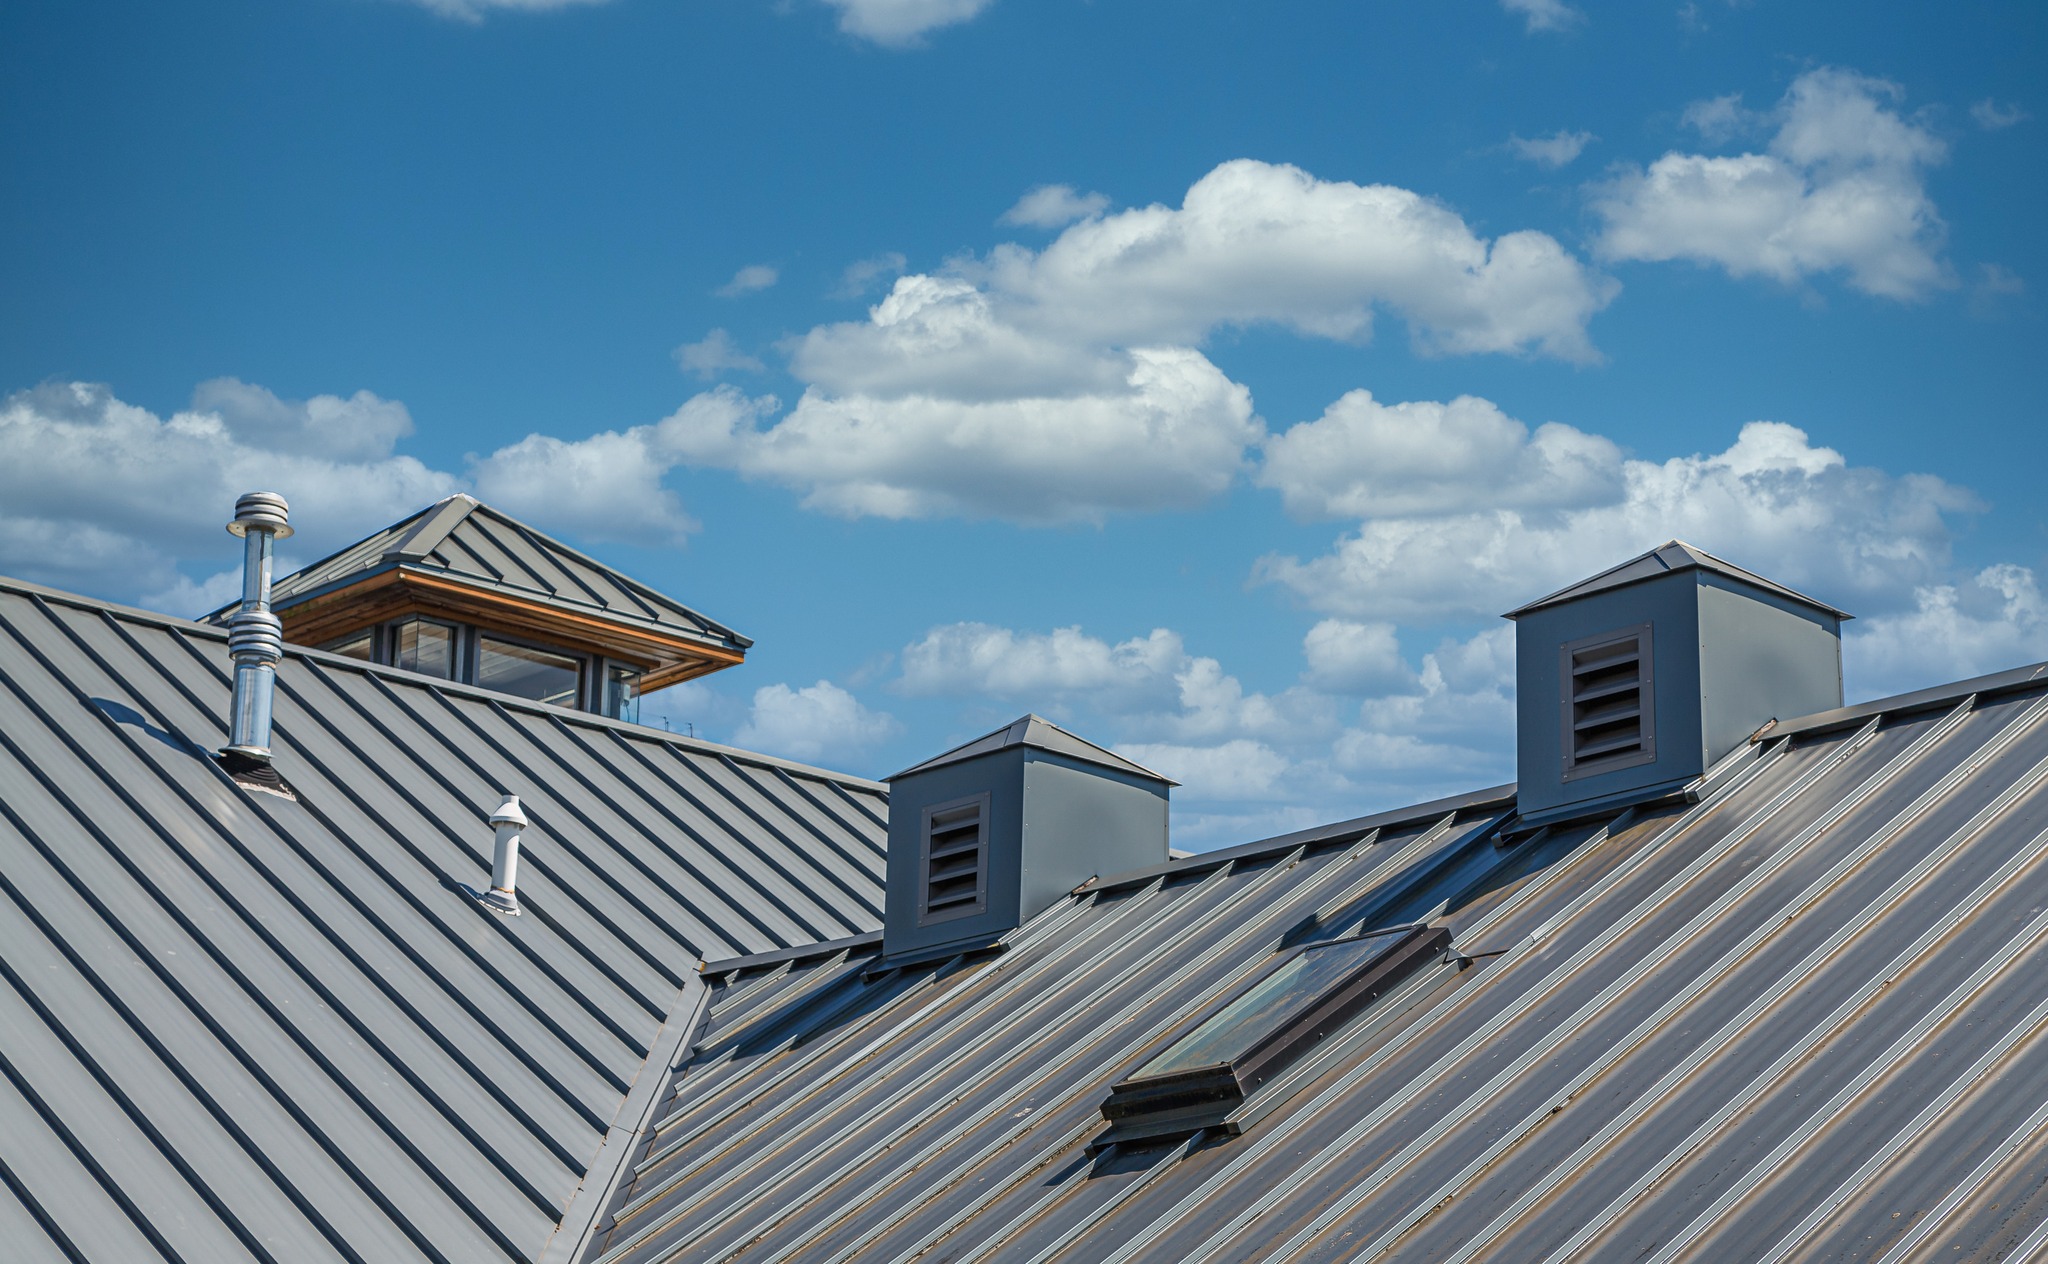 Central Oregon Roofing - Gallery 1